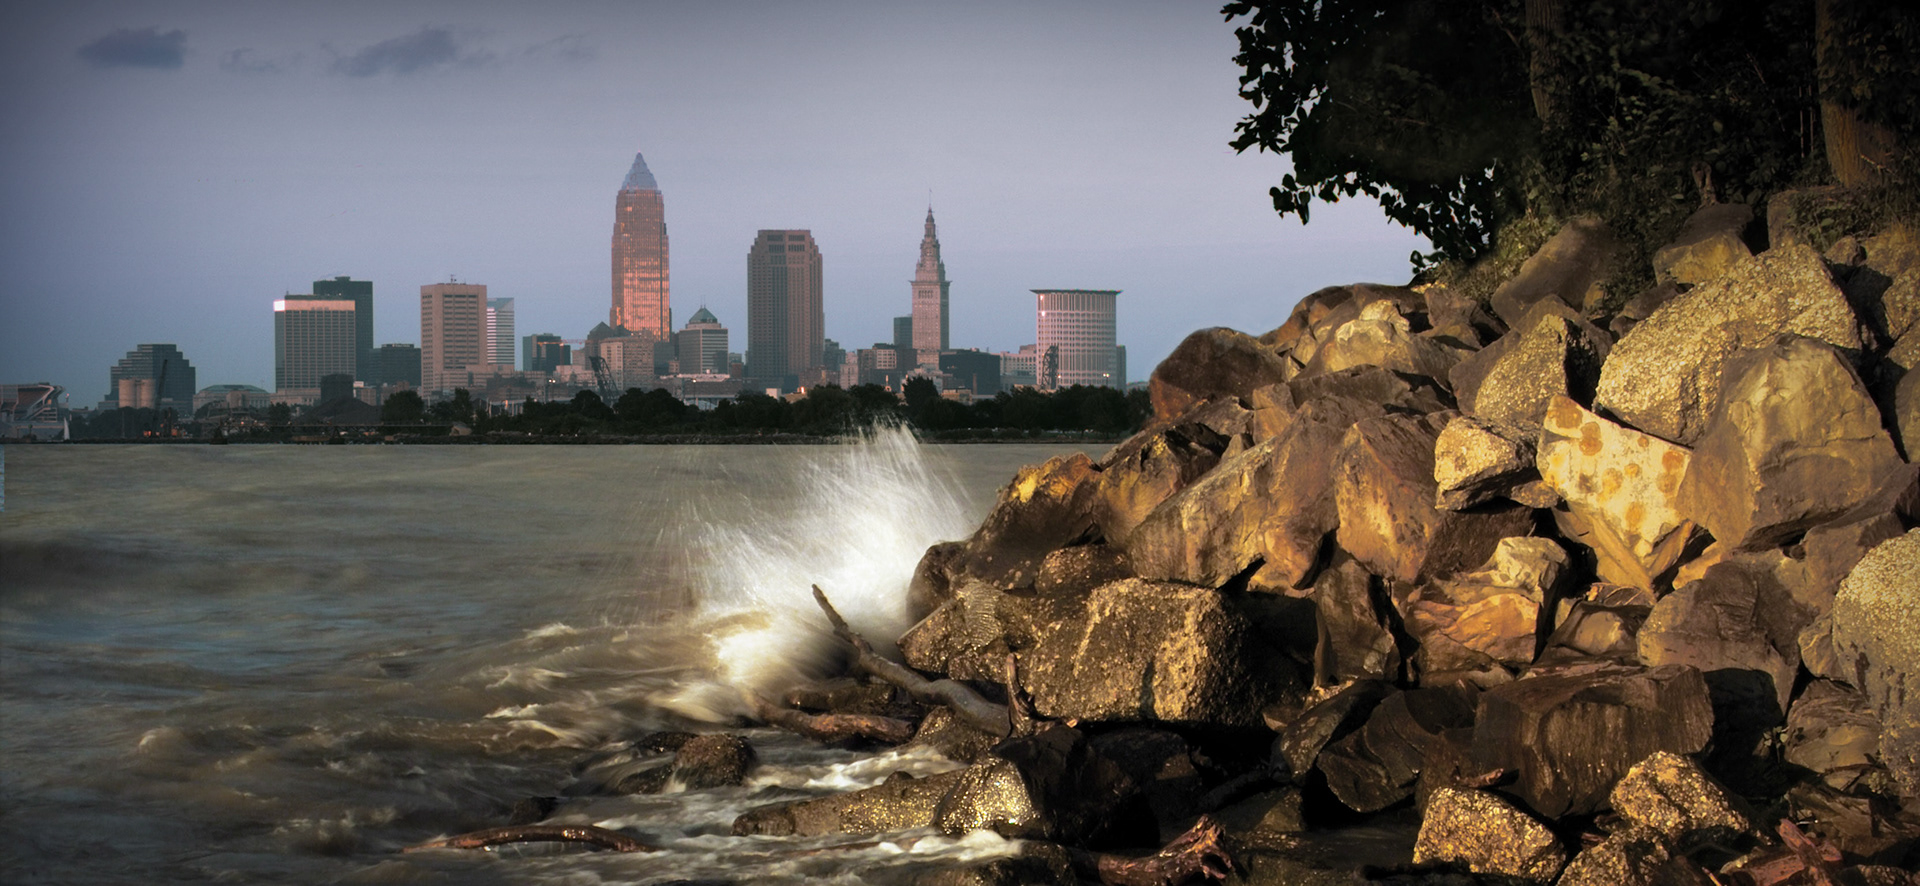 The Paul Duda Gallery ~ Photography of Cleveland